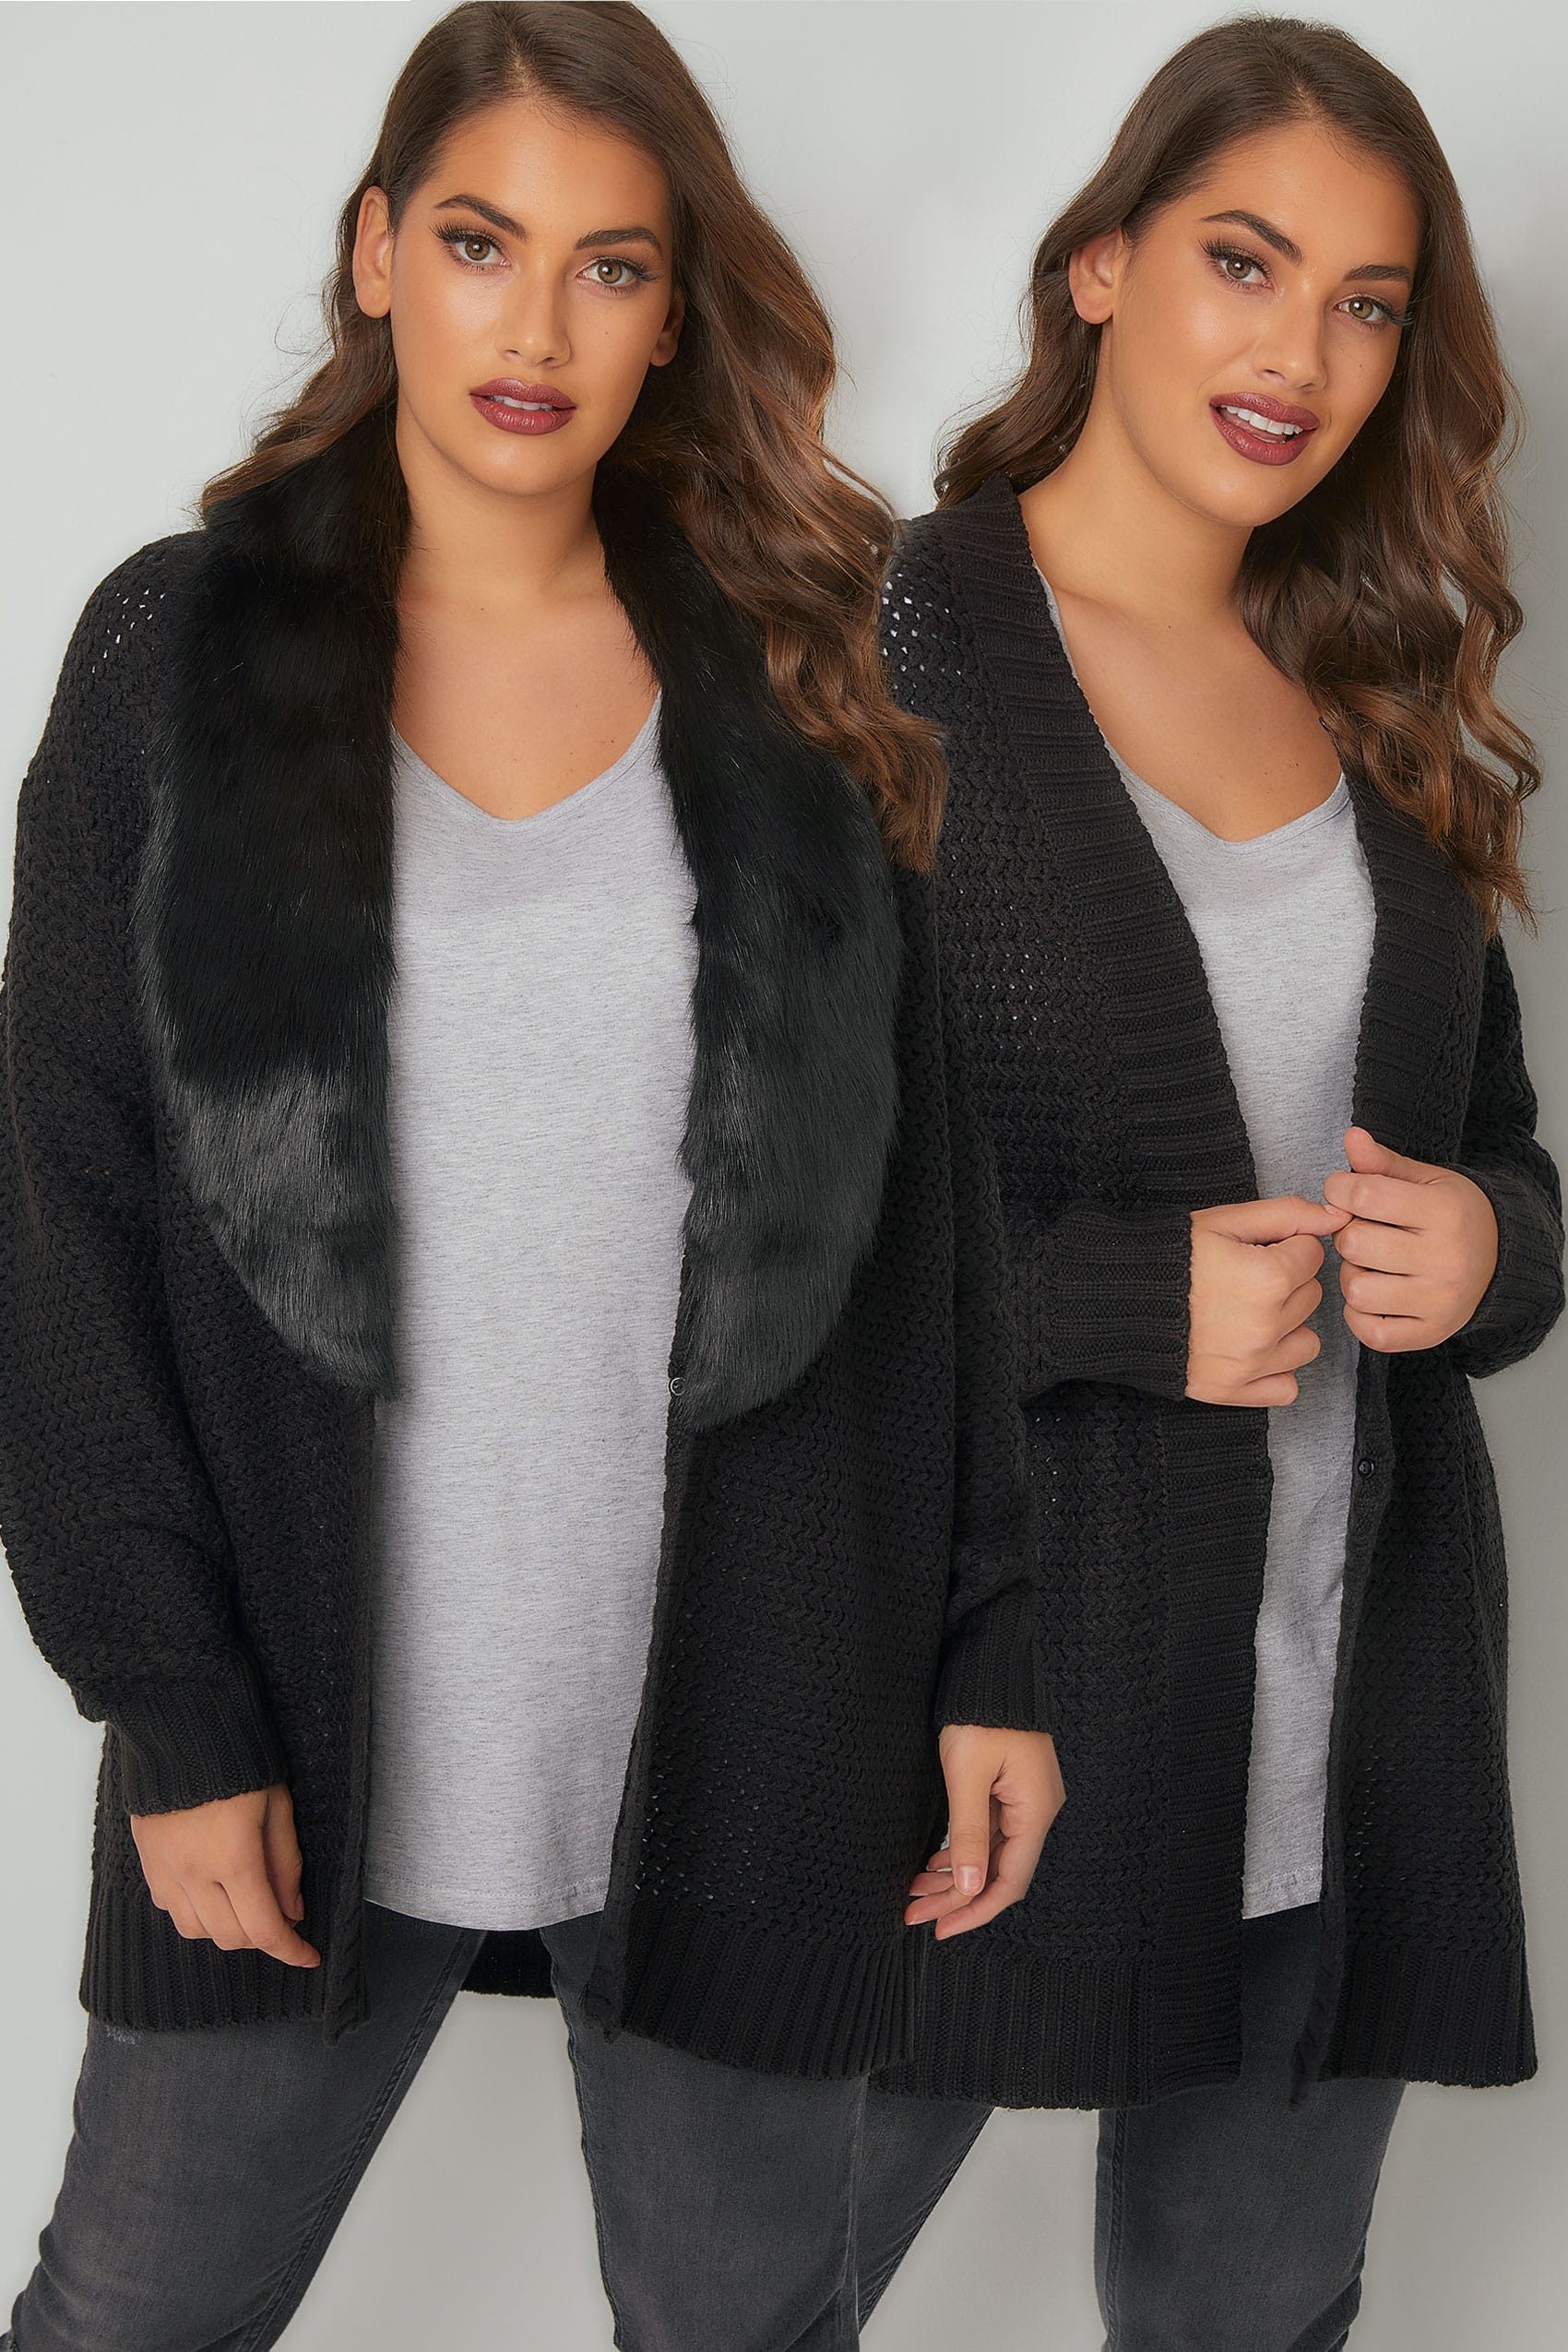 Black Knitted Cardigan With Faux Fur Collar Plus Size 16 To 36